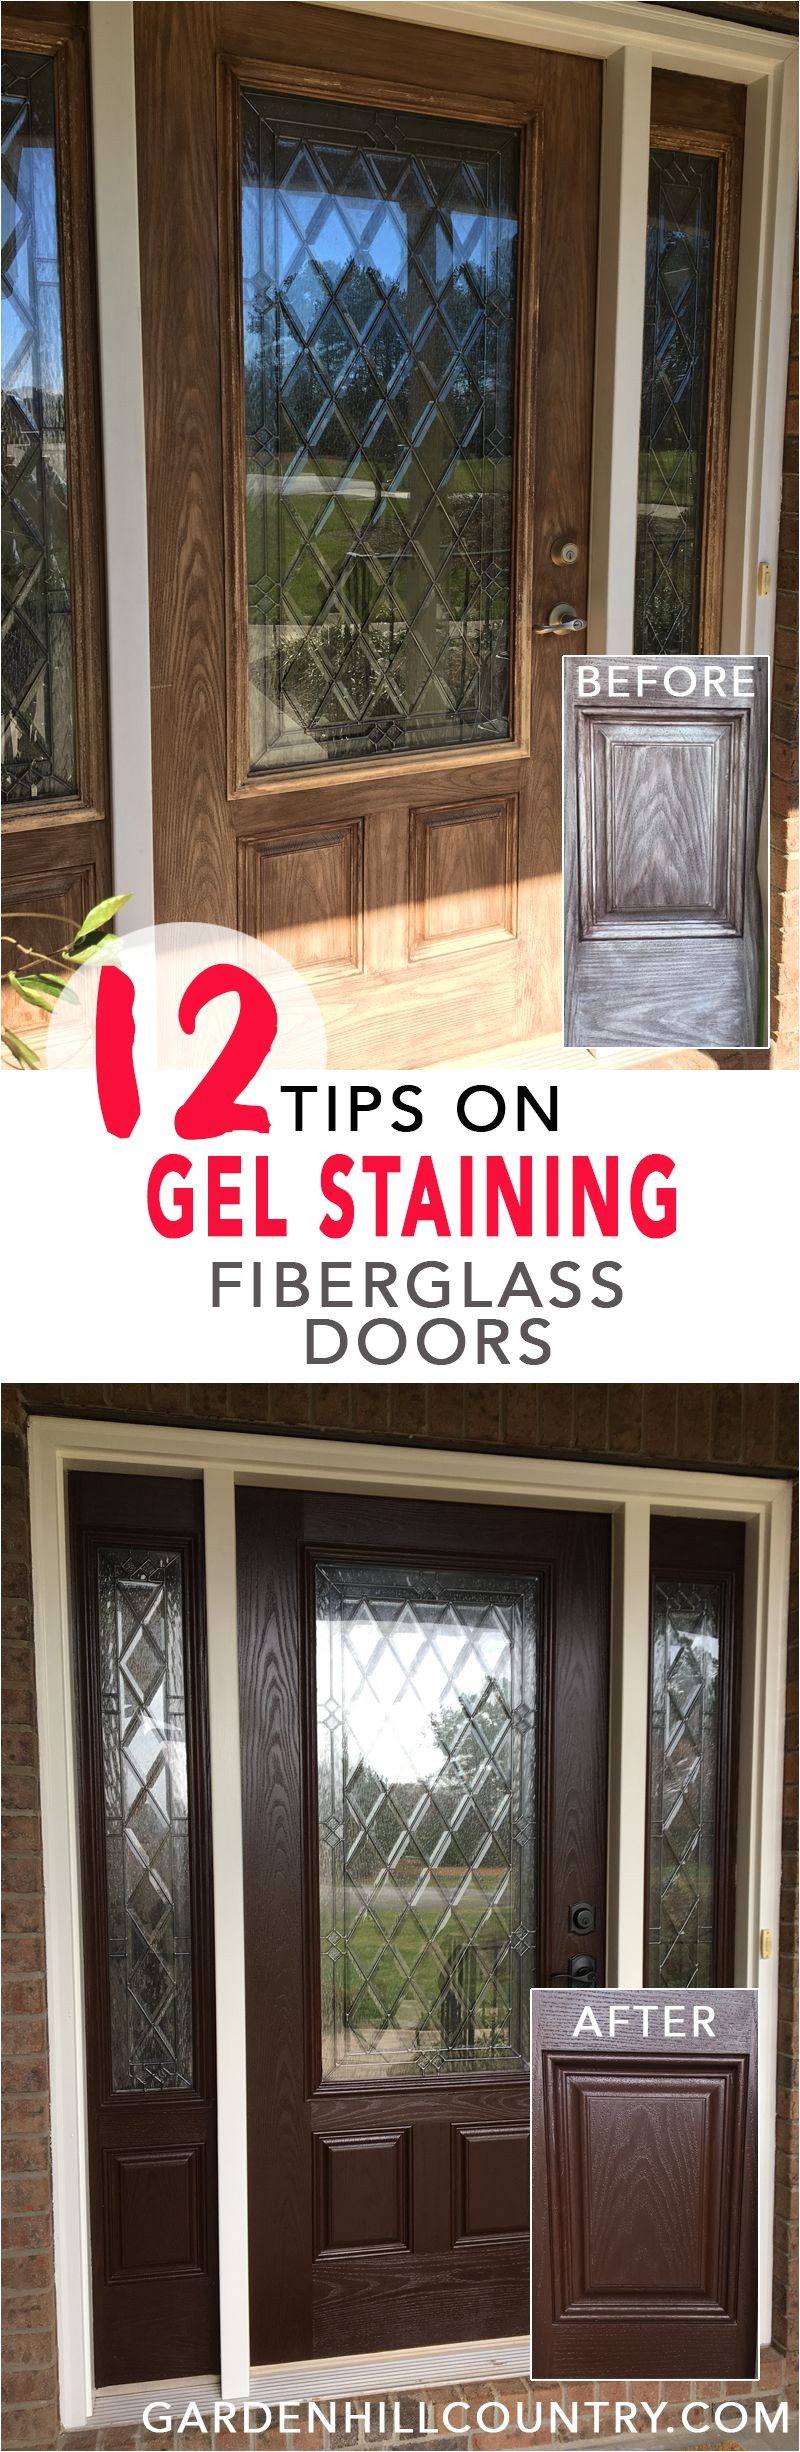 here are 12 tips for gel staining fiberglass doors including information on supplies surface preparation gel application dry time and more